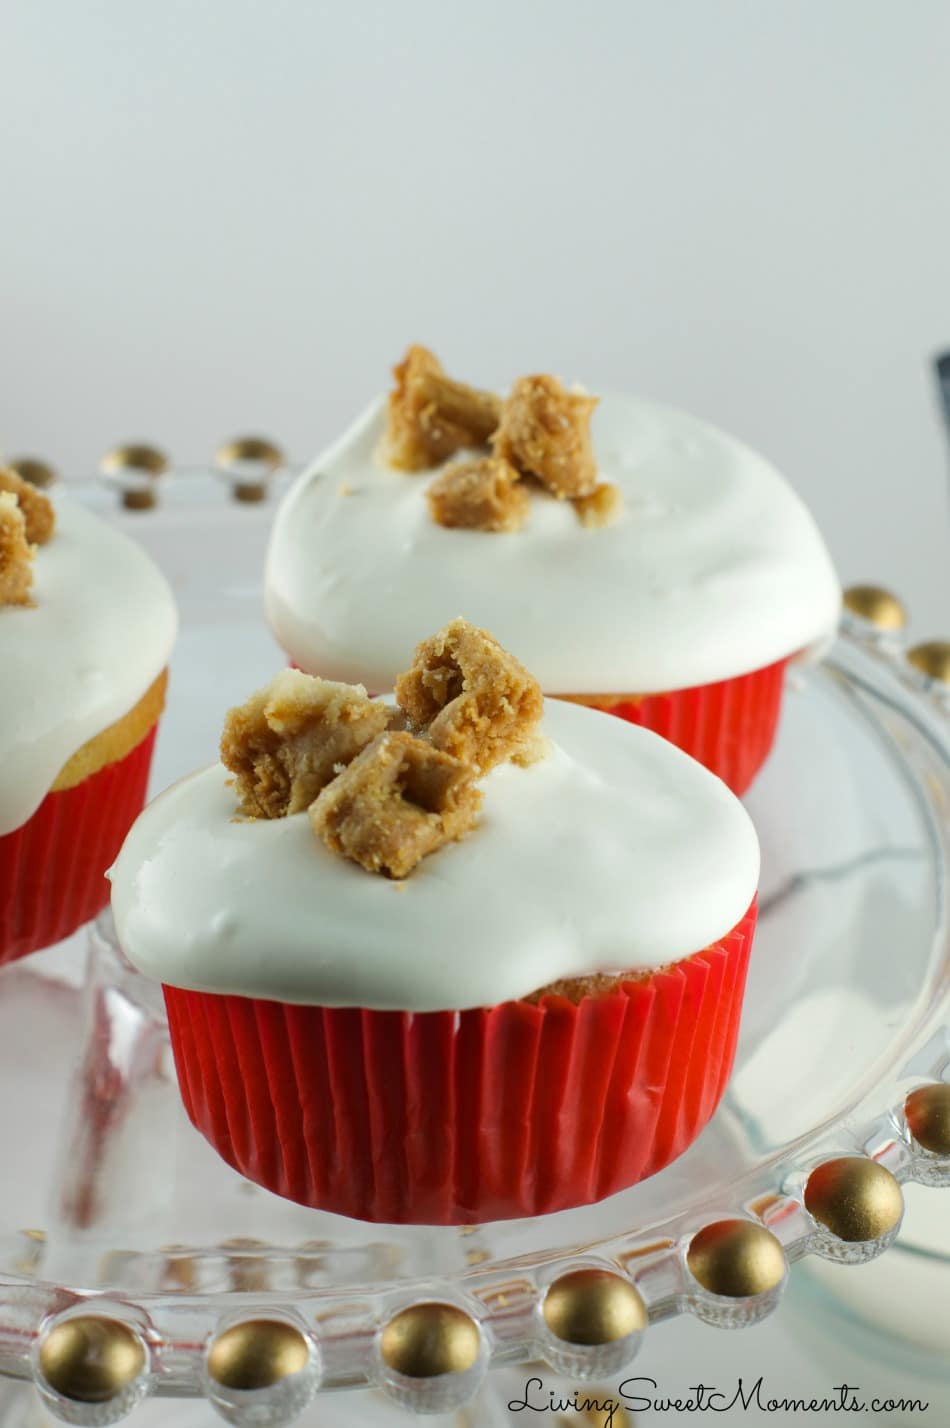 These Pumpkin Pie Cupcakes taste amazing. Delicious cake filled with pumpkin pie and topped with toasted crust. Perfect for fall or Thanksgiving!